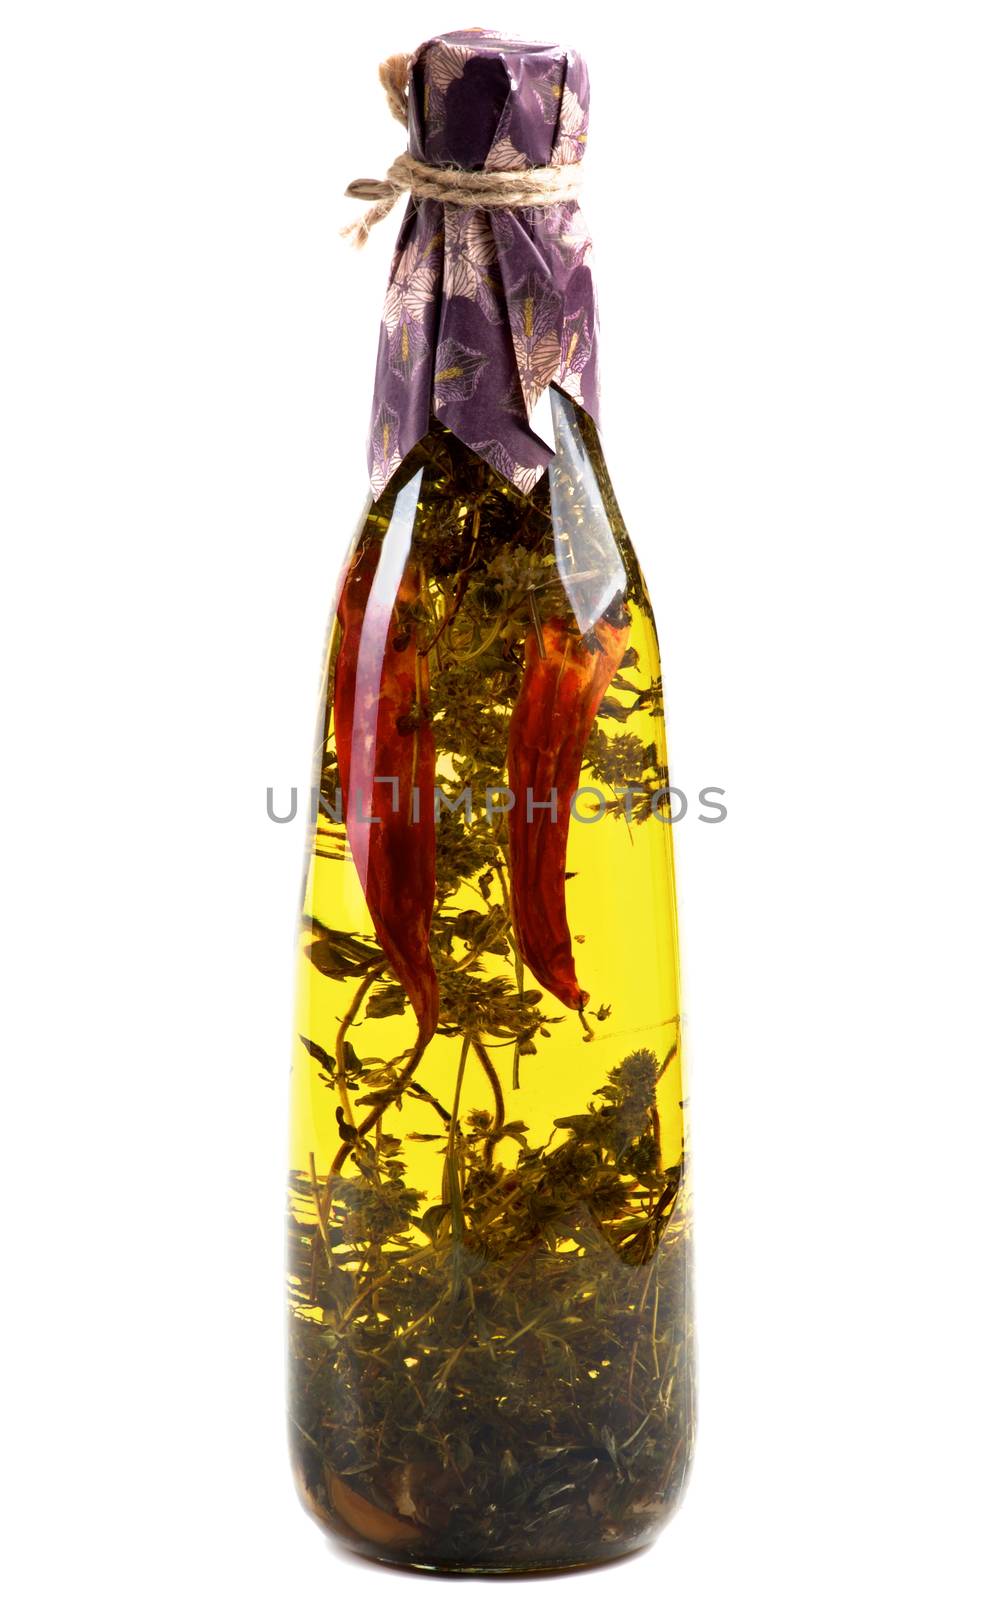 Bottle of Handmade Chili Pepper, Herbs and Spices isolated on White background